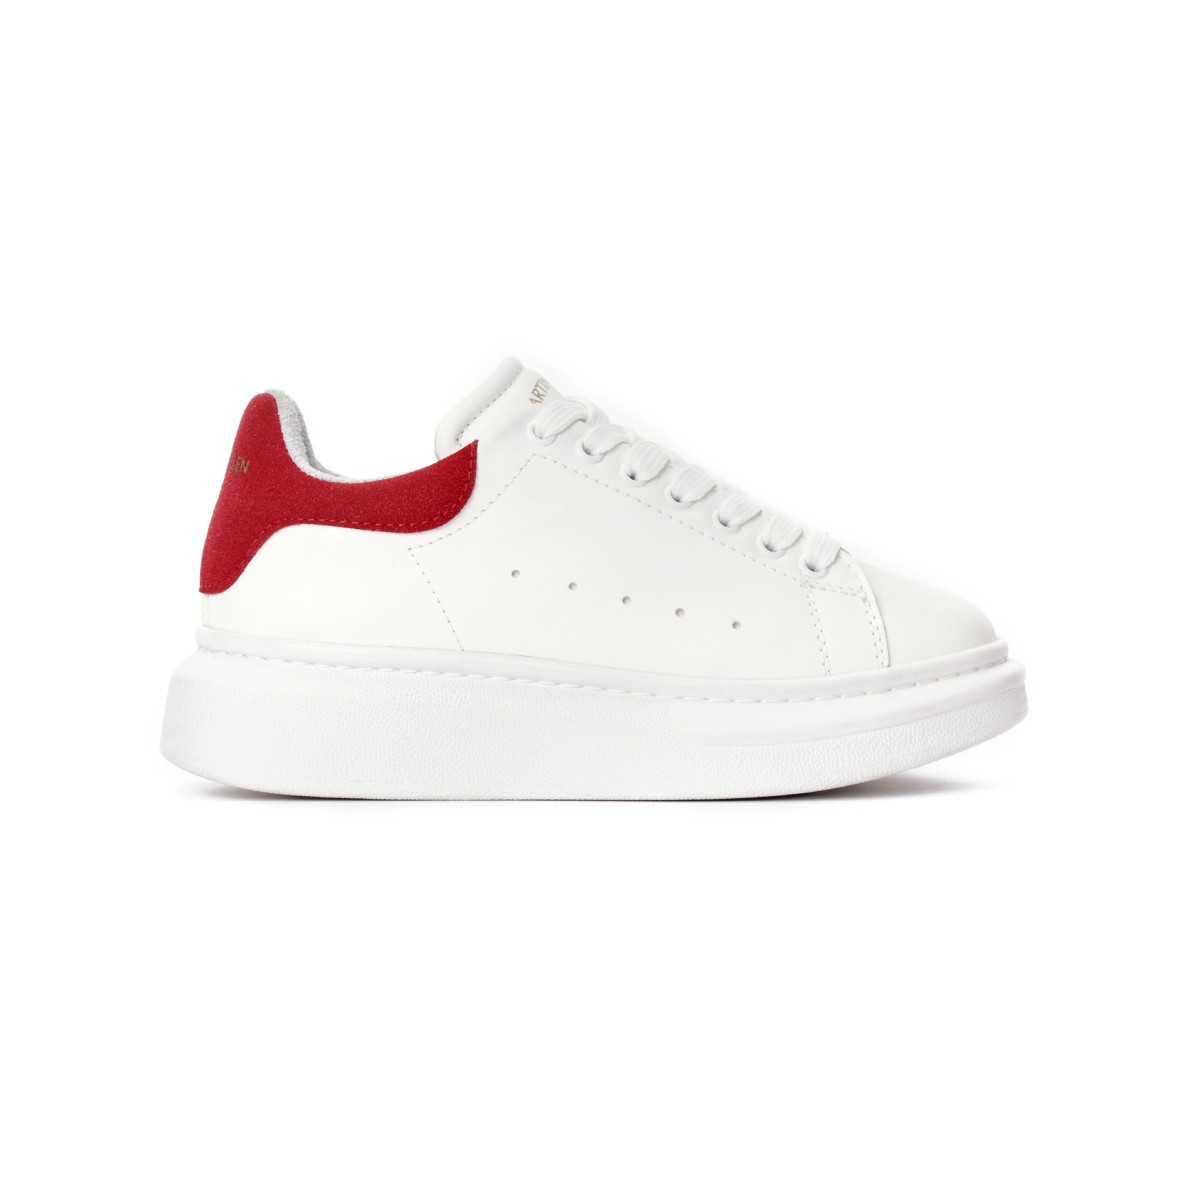 Martin Valen Women’s Chunky Sneakers in White and Red